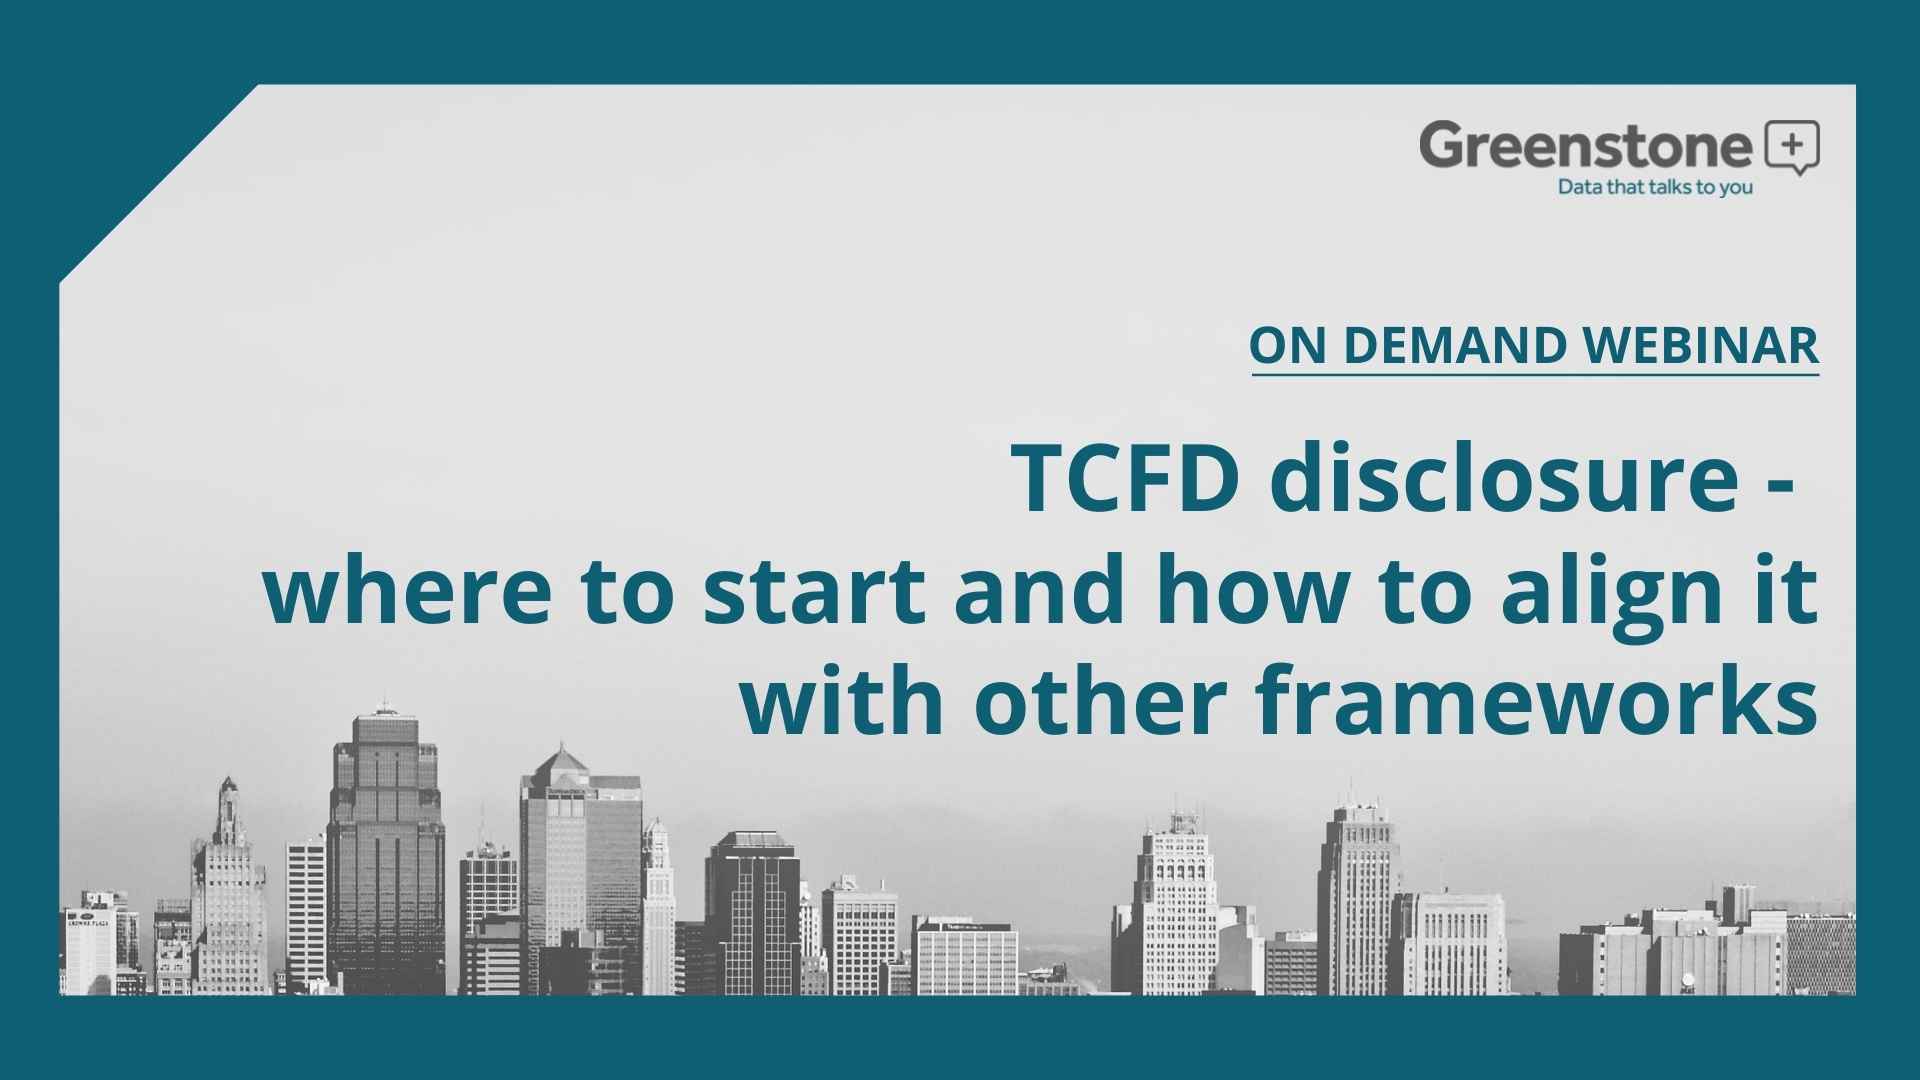 TCFD disclosure – where to start and how to align it with other frameworks